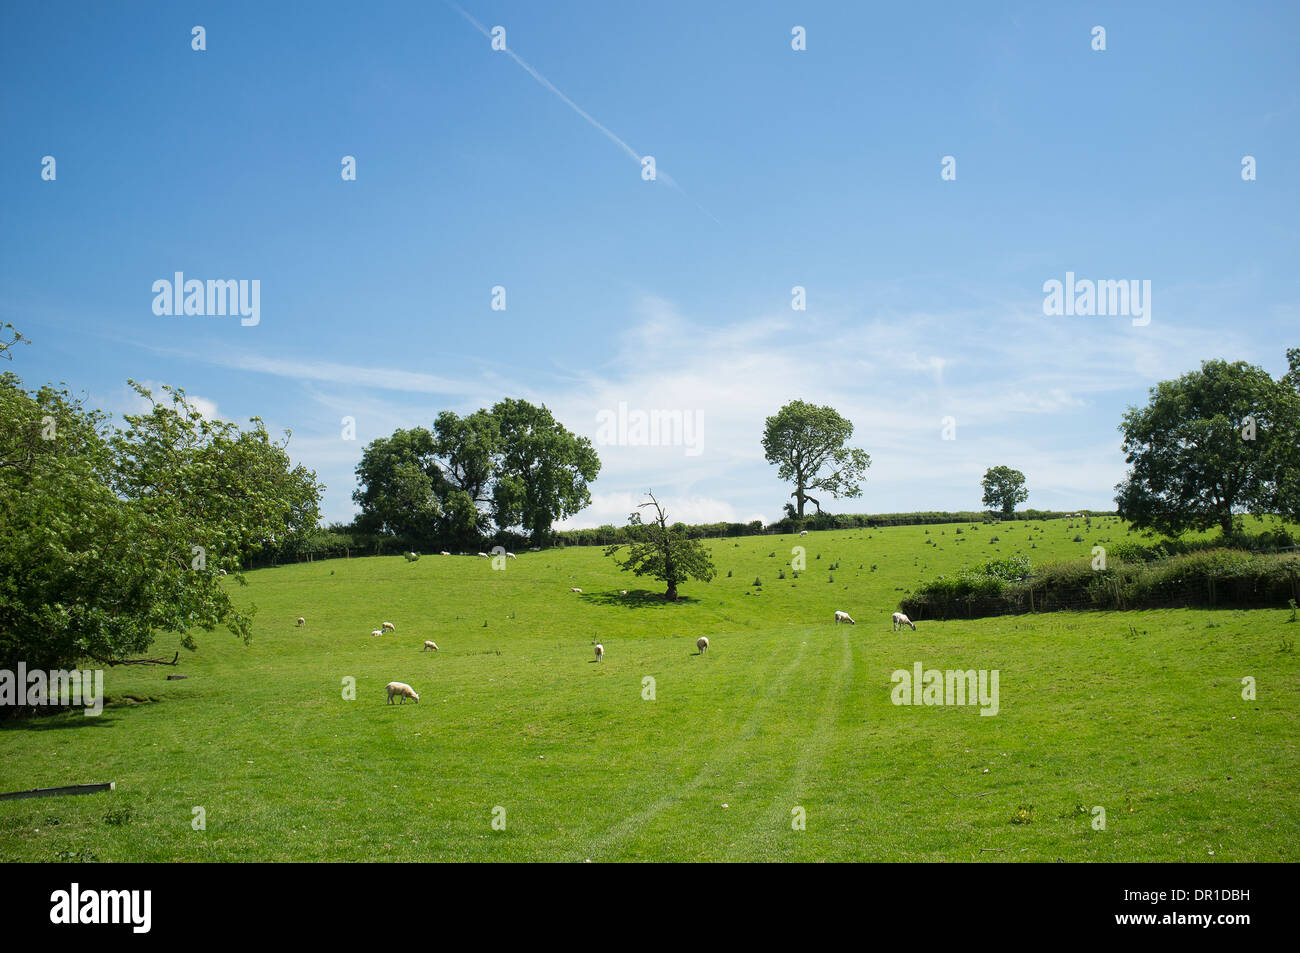 Sheep grazing in a field in pretty English countryside. Stock Photo